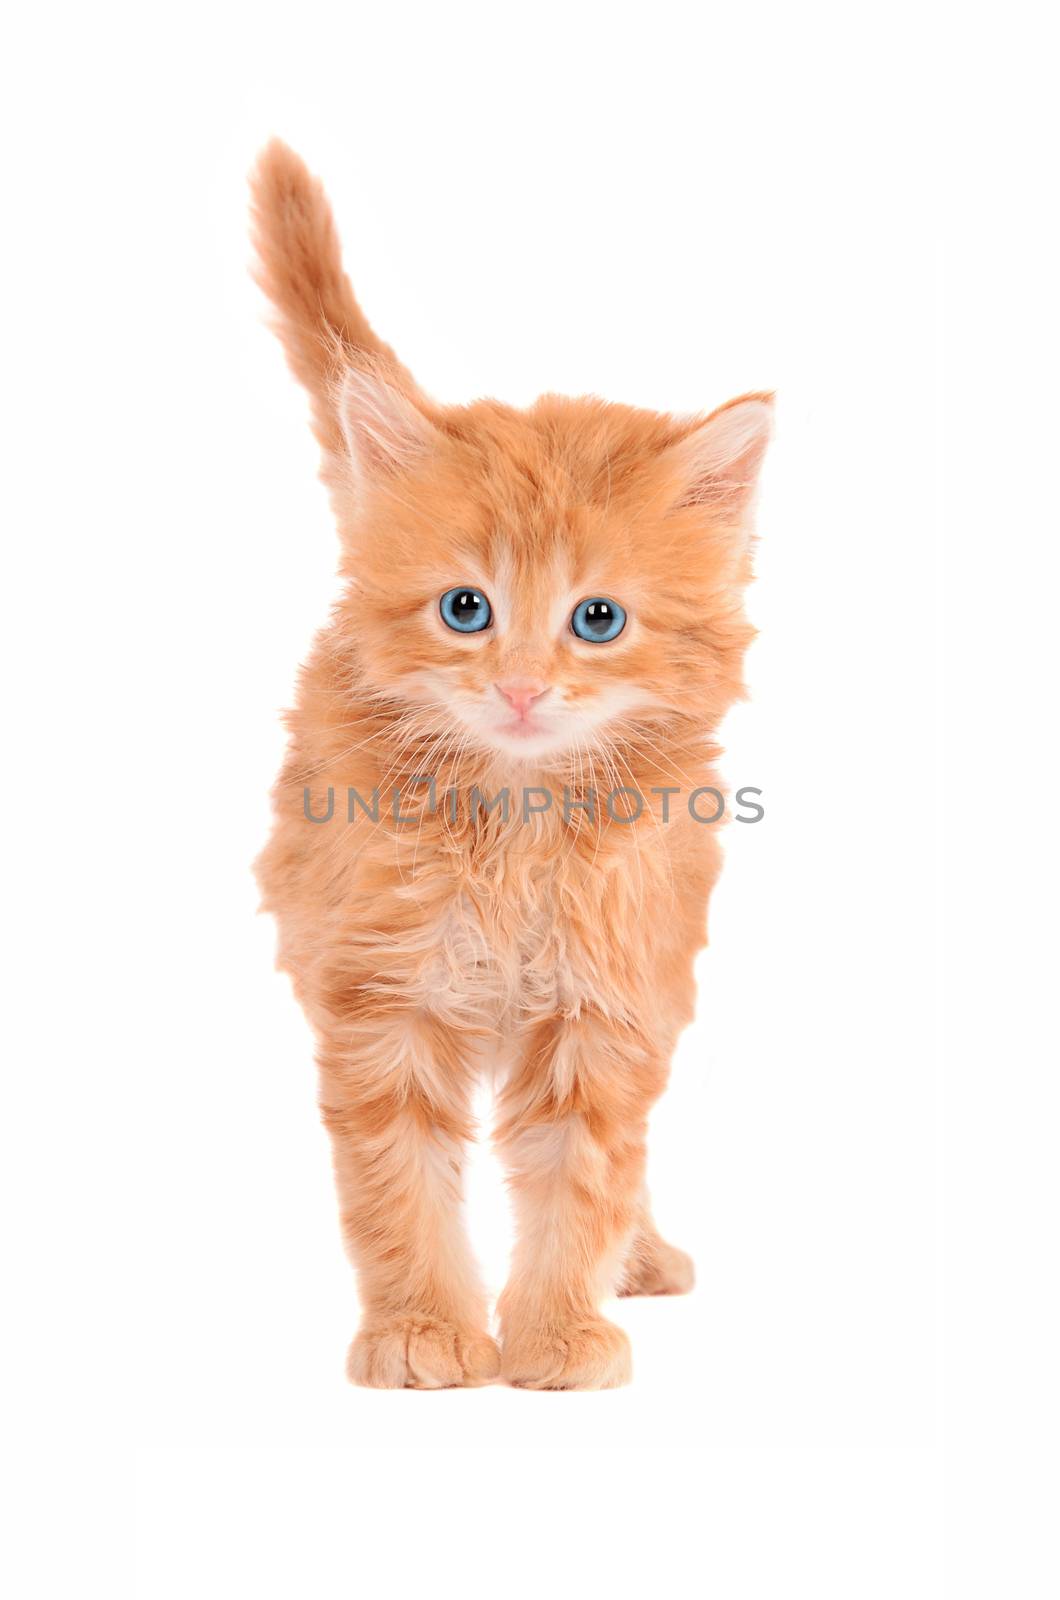 Sad looking ginger kitten with a white background by dnsphotography